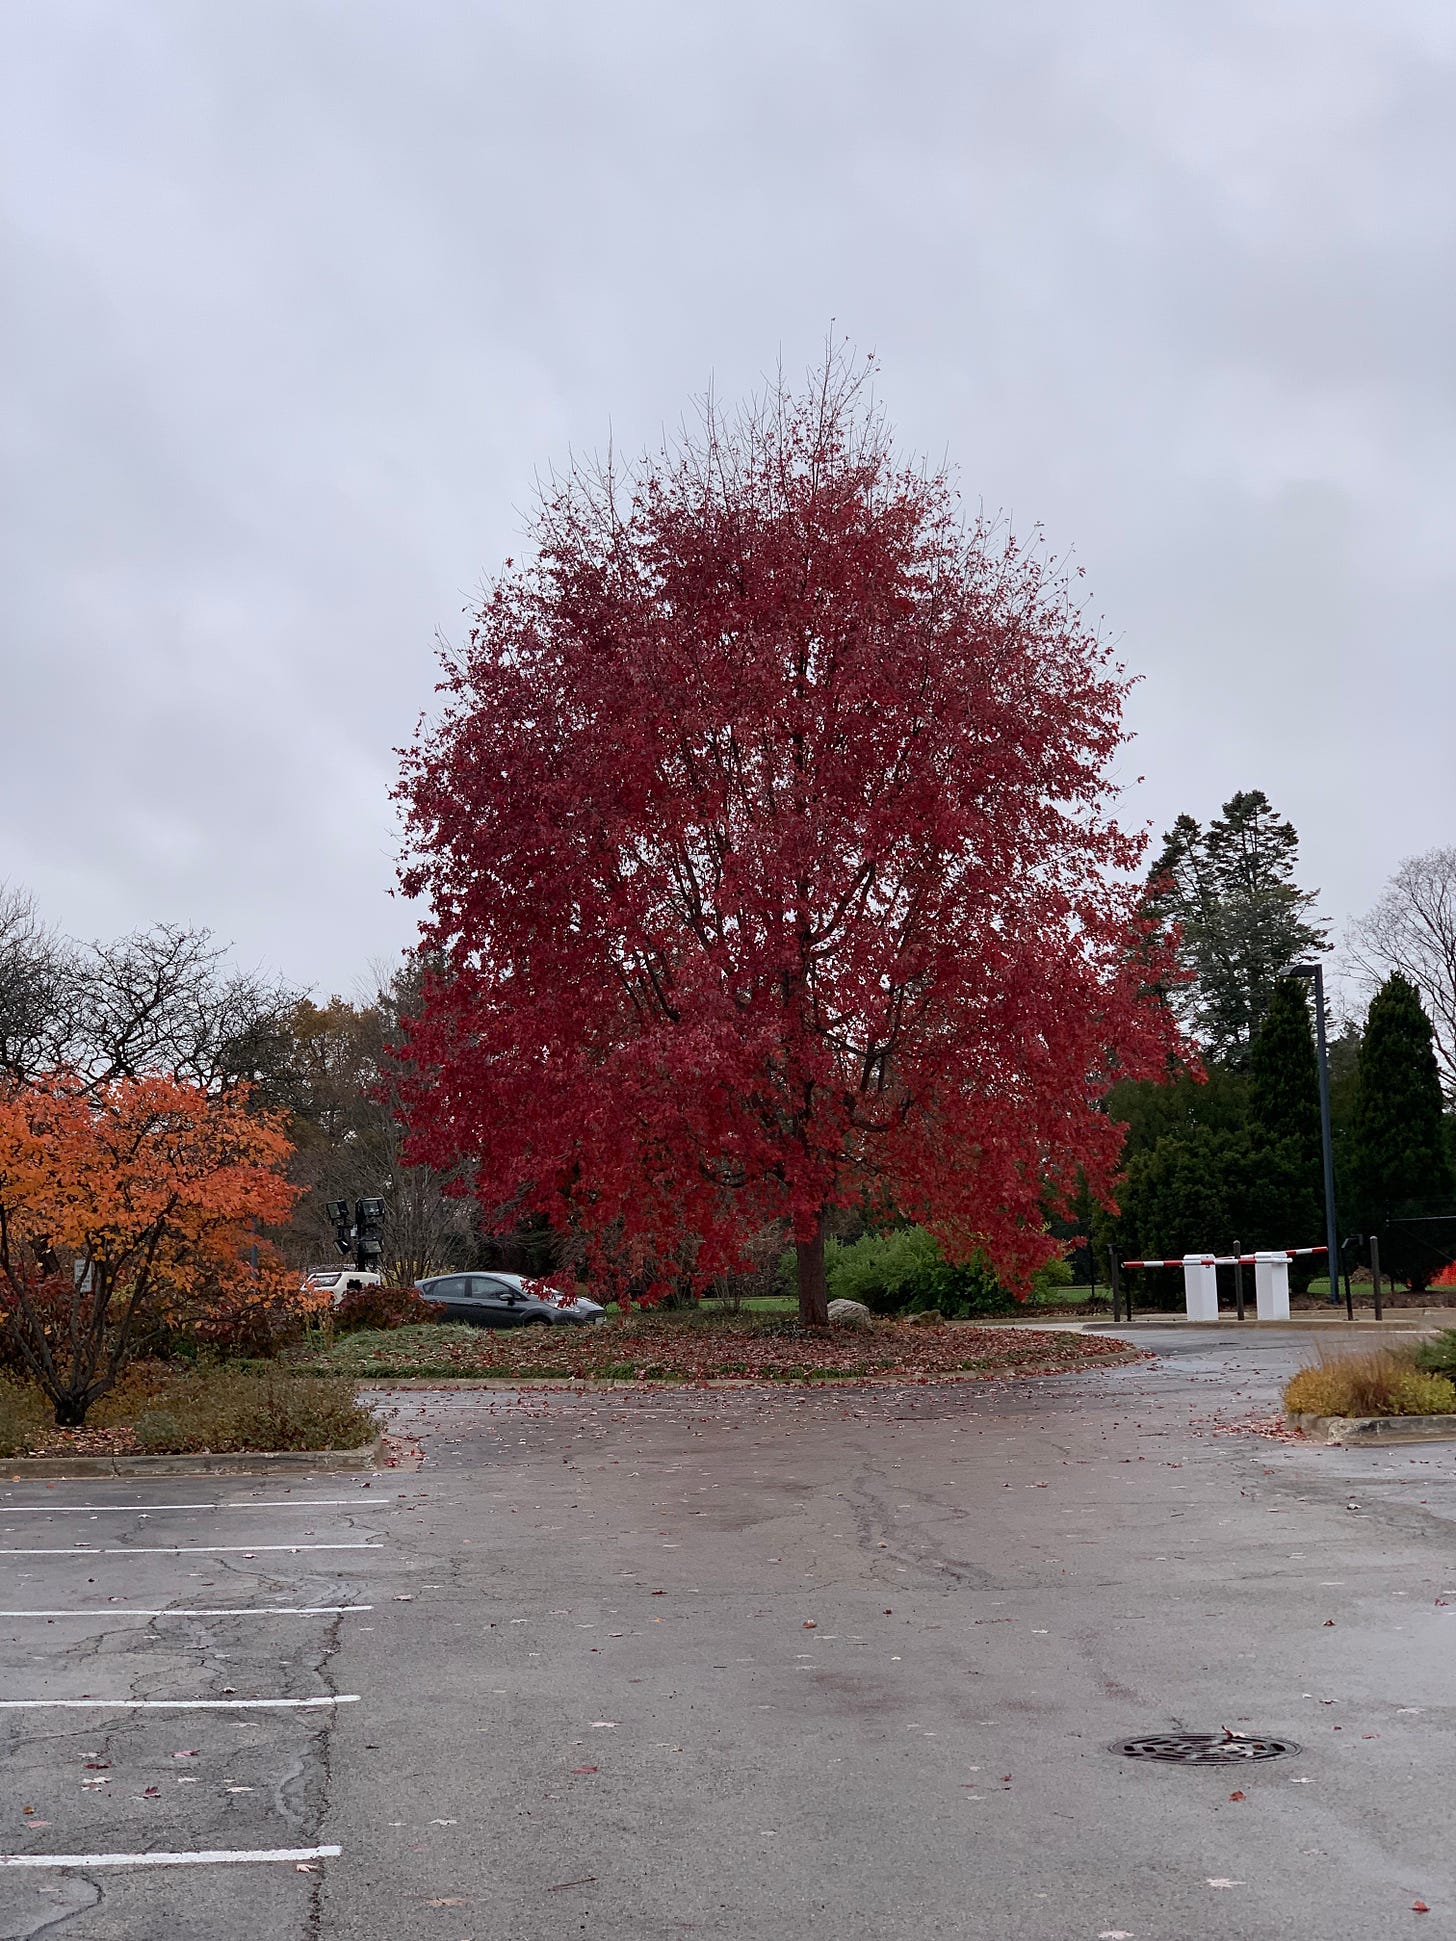 A parking lot with a bright crimson tree growing next to it. The sky is grey and cloudy.